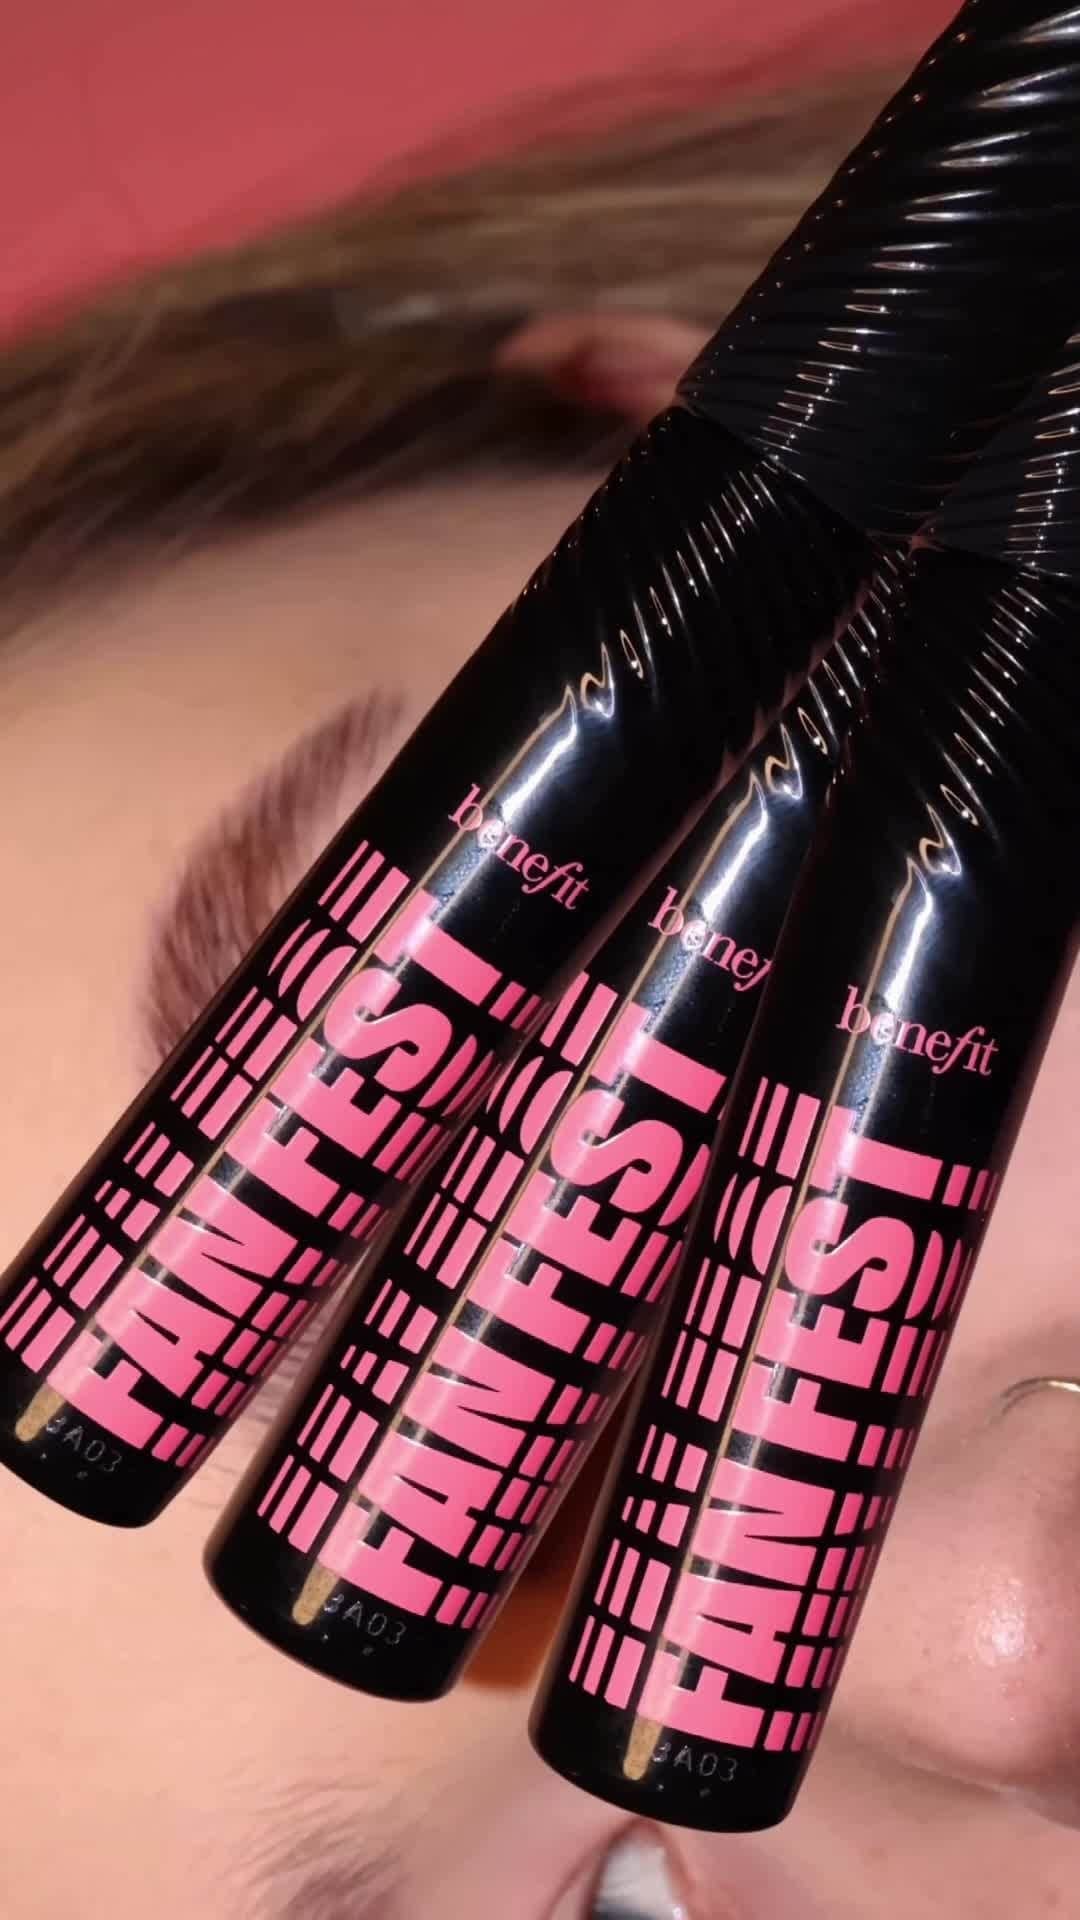 Benefit Cosmeticsのインスタグラム：「Wanna see double? 👀🖤 Multiply the look of lashes like never before with Fan Fest Mascara! Just give a few fanning swipes from side-to-side and watch the volume amplify 🤩⁠ ⁠ 👩‍🎨: @colleen.makeupp⁠ ⁠ #benefitcosmetics #fanfest #mascara」